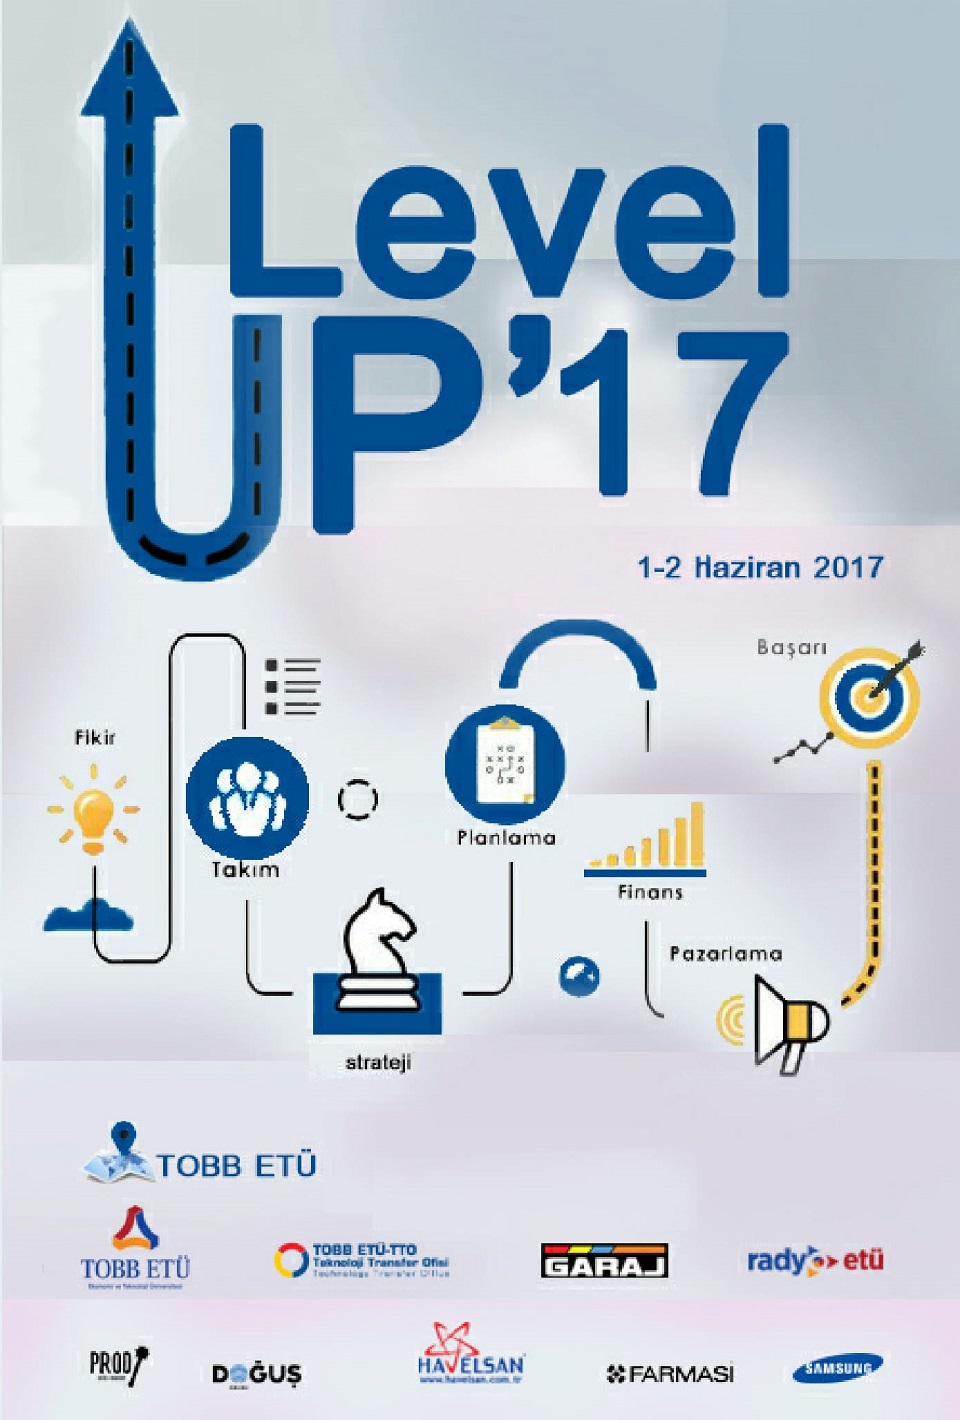 LevelUp’17 to Bring Entrepreneurs and Potential Entrepreneurs Together Is to be Held at TOBB ETÜ On 1-2 June